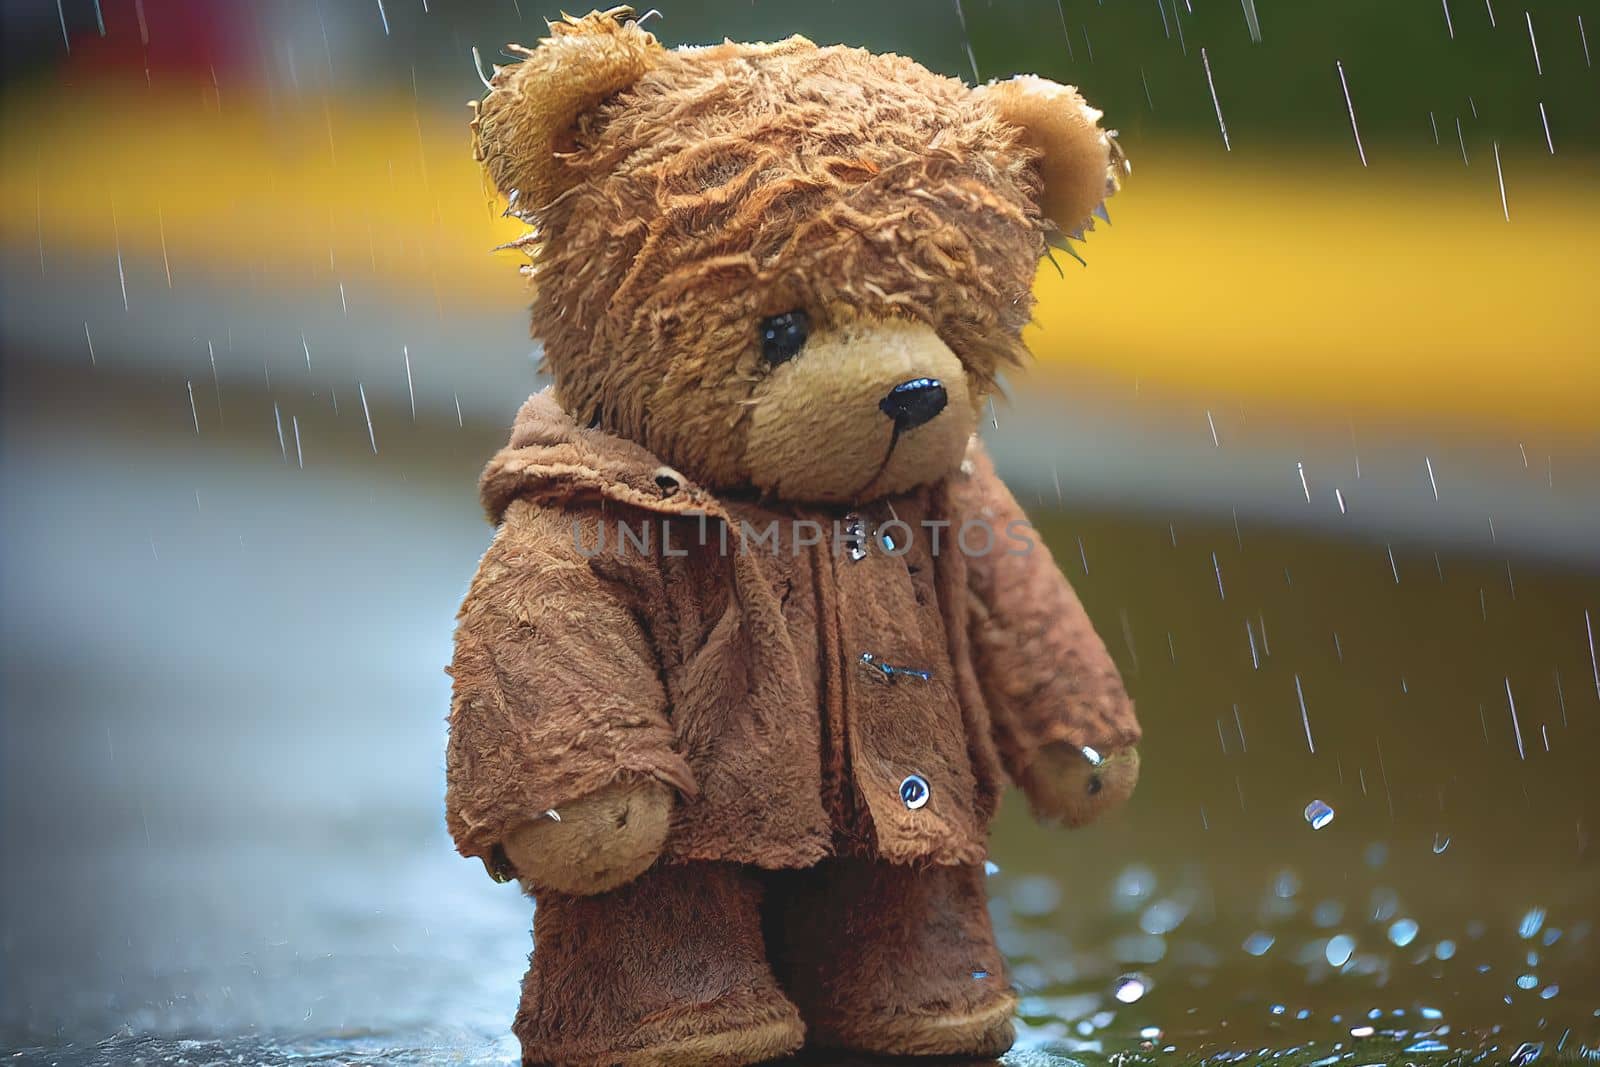 Small brown teddy bear standing in the rain, concept feelings of nostalgia and longing by FokasuArt